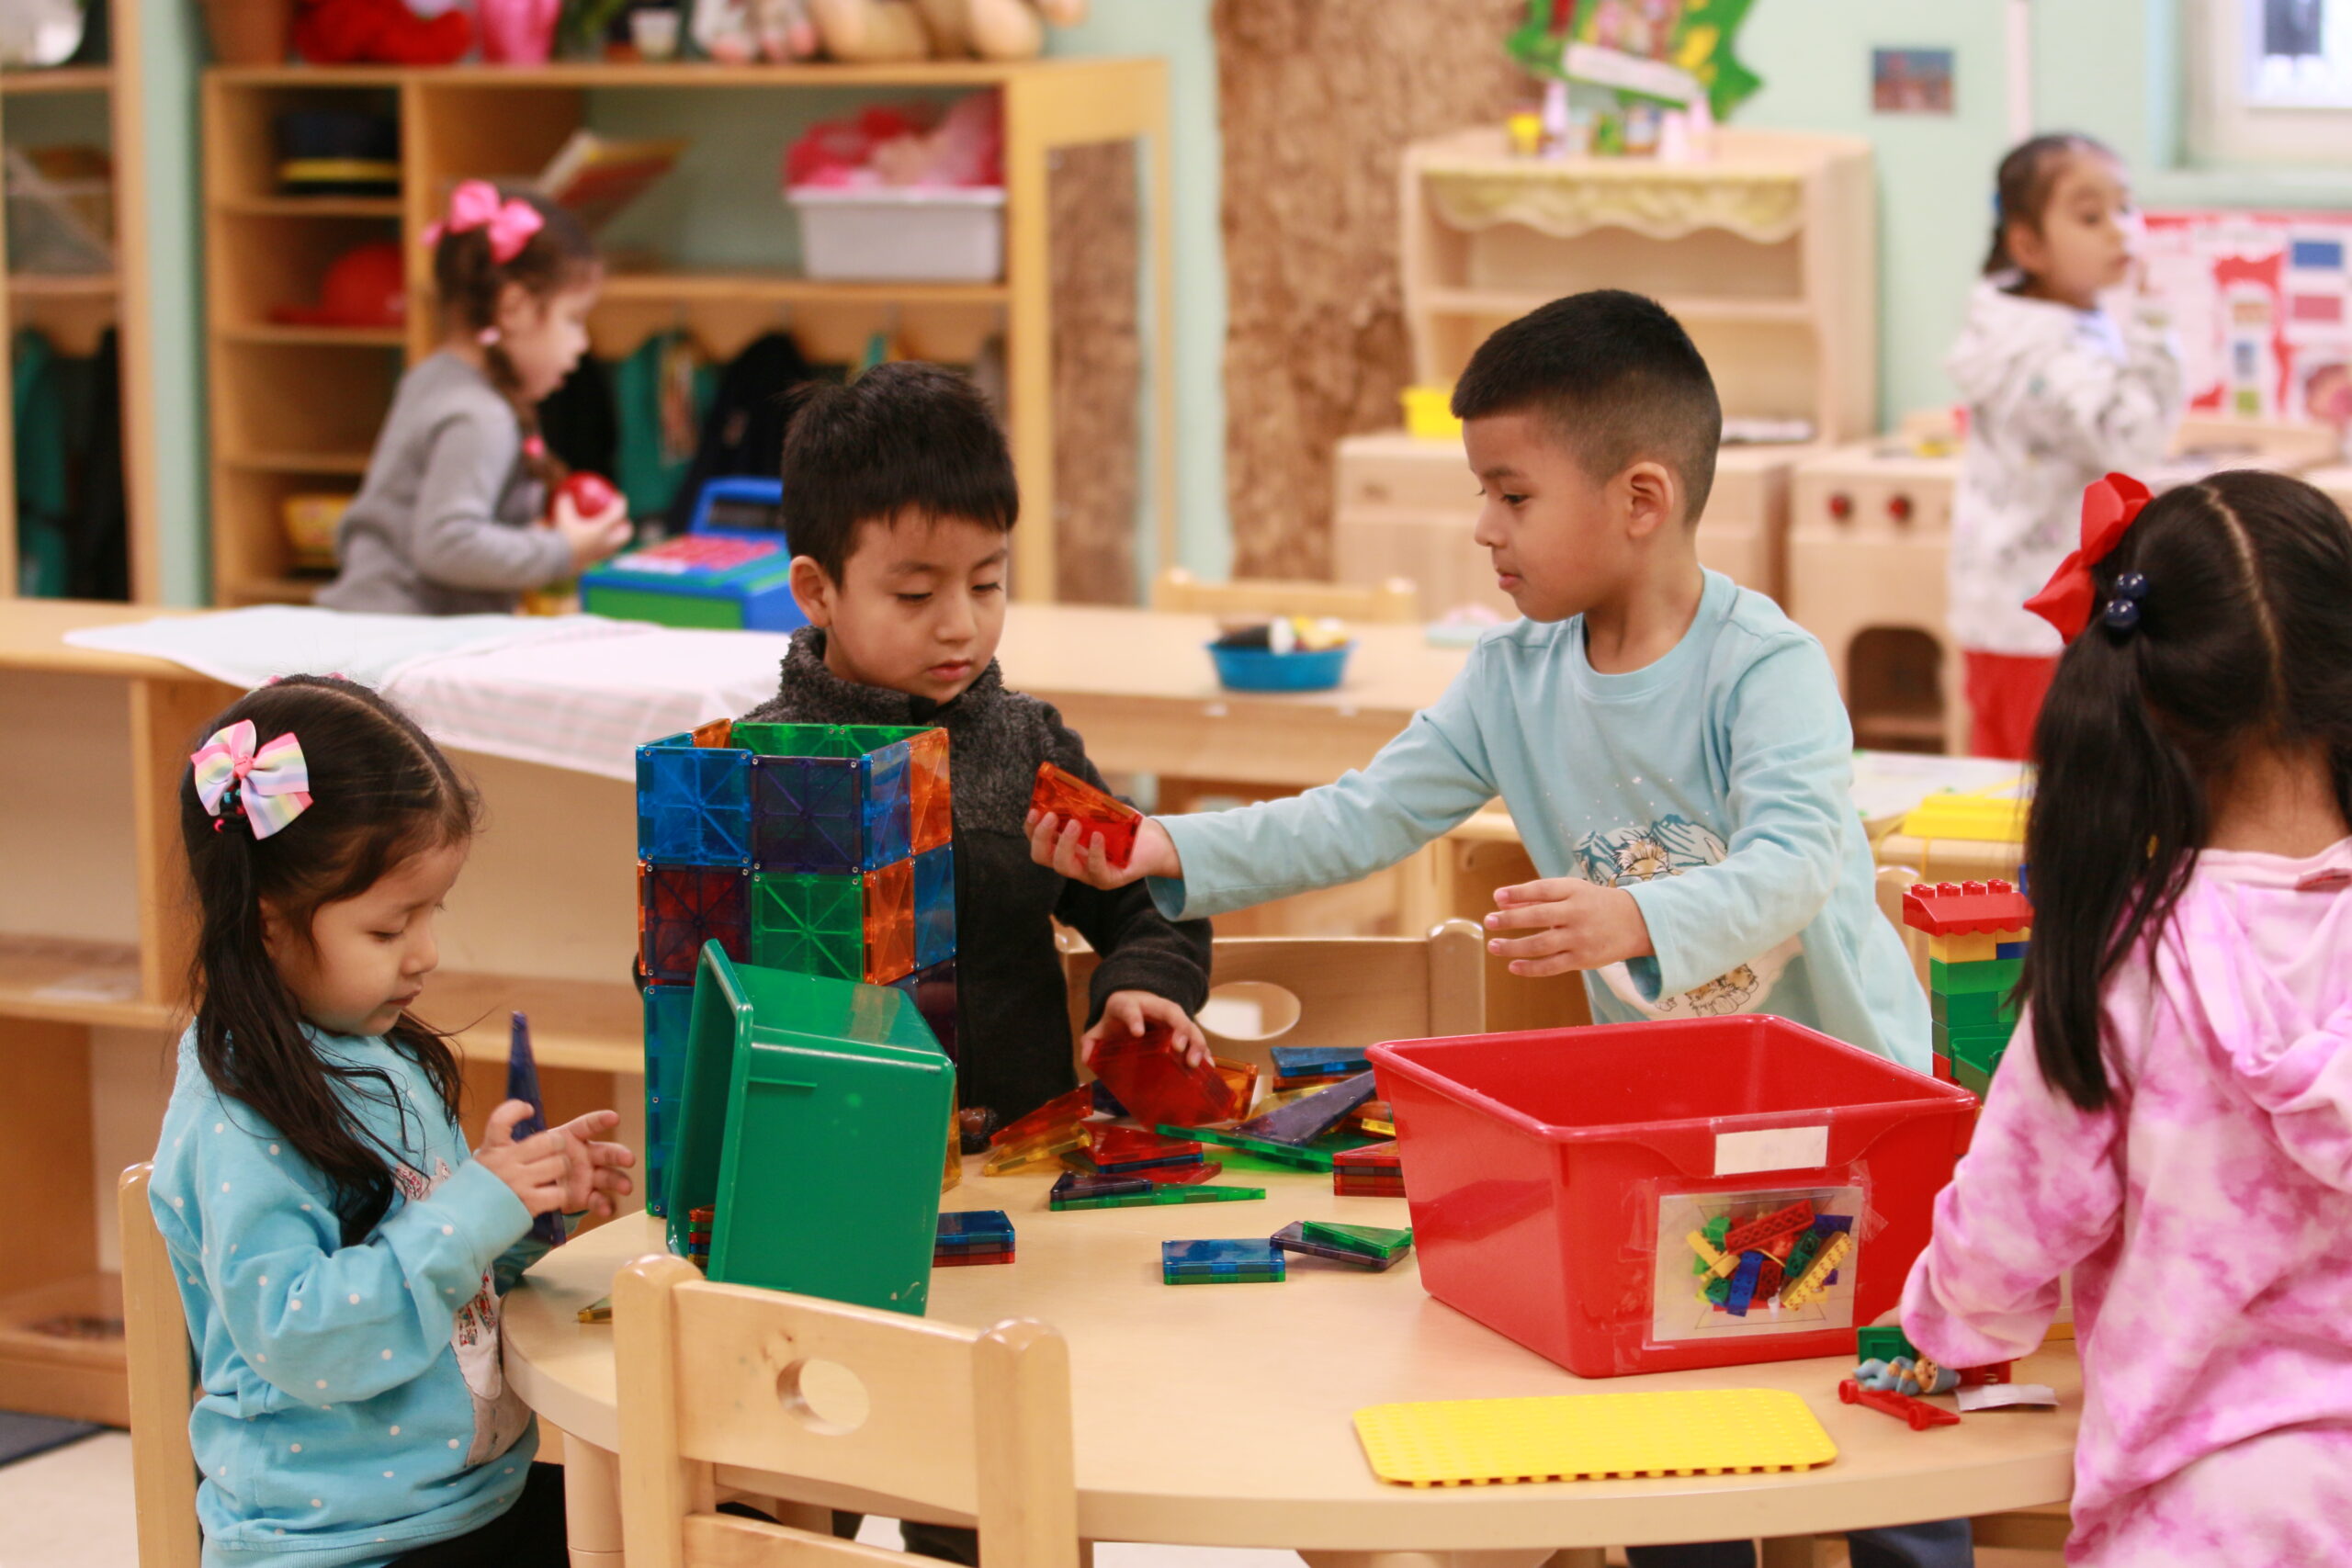 A Head Start classroom at The Child Center of NY’s Early Childhood Corona Center, where 10 to 15 percent of enrolled children are from migrant families. Photo credit: Vier Visuals